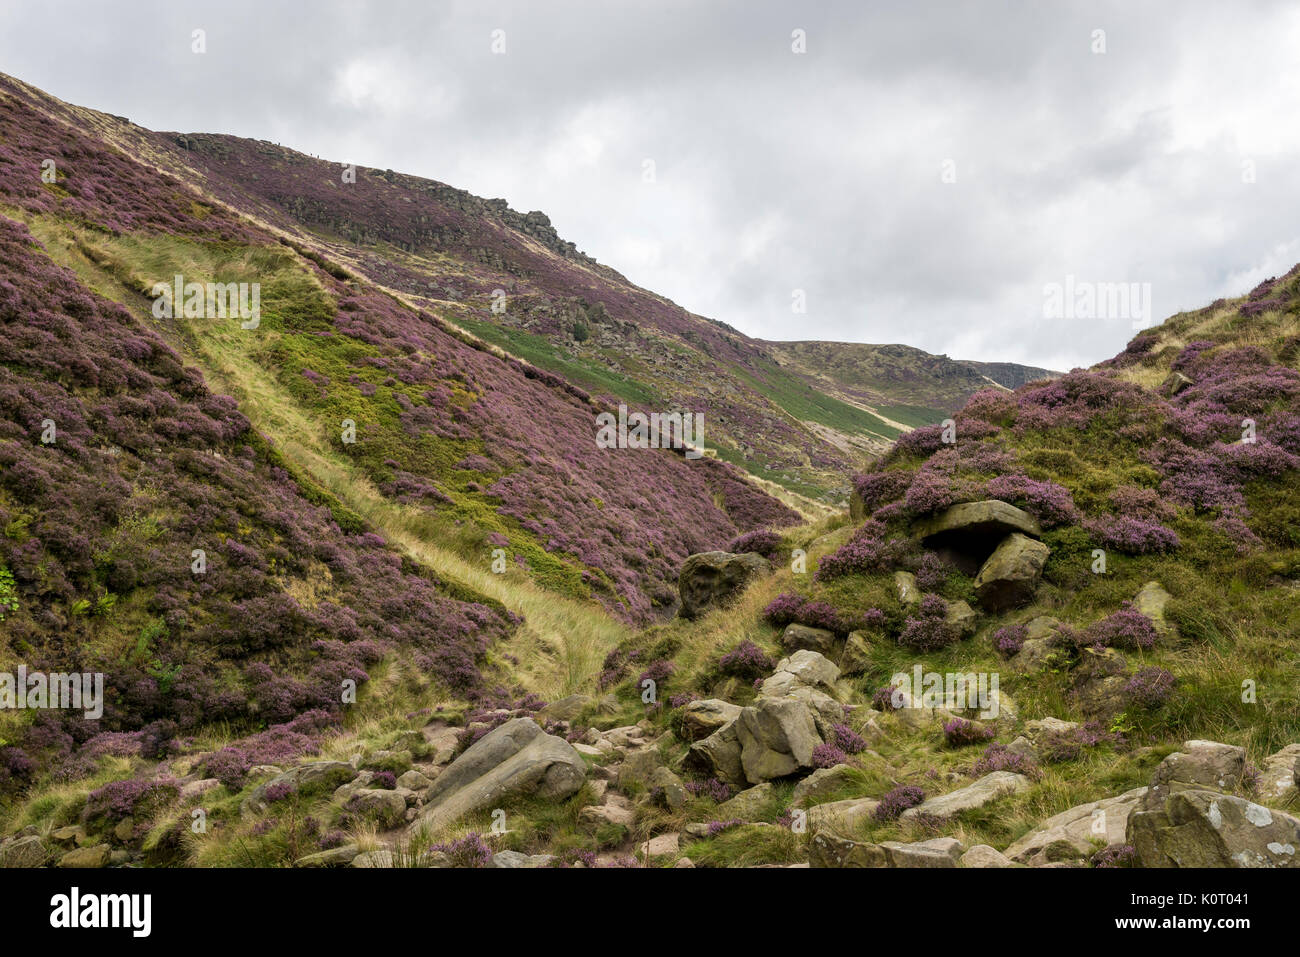 Purple heather on the slopes of Grindsbrook Clough near Edale in the Peak District national park, Derbyshire, England. Stock Photo